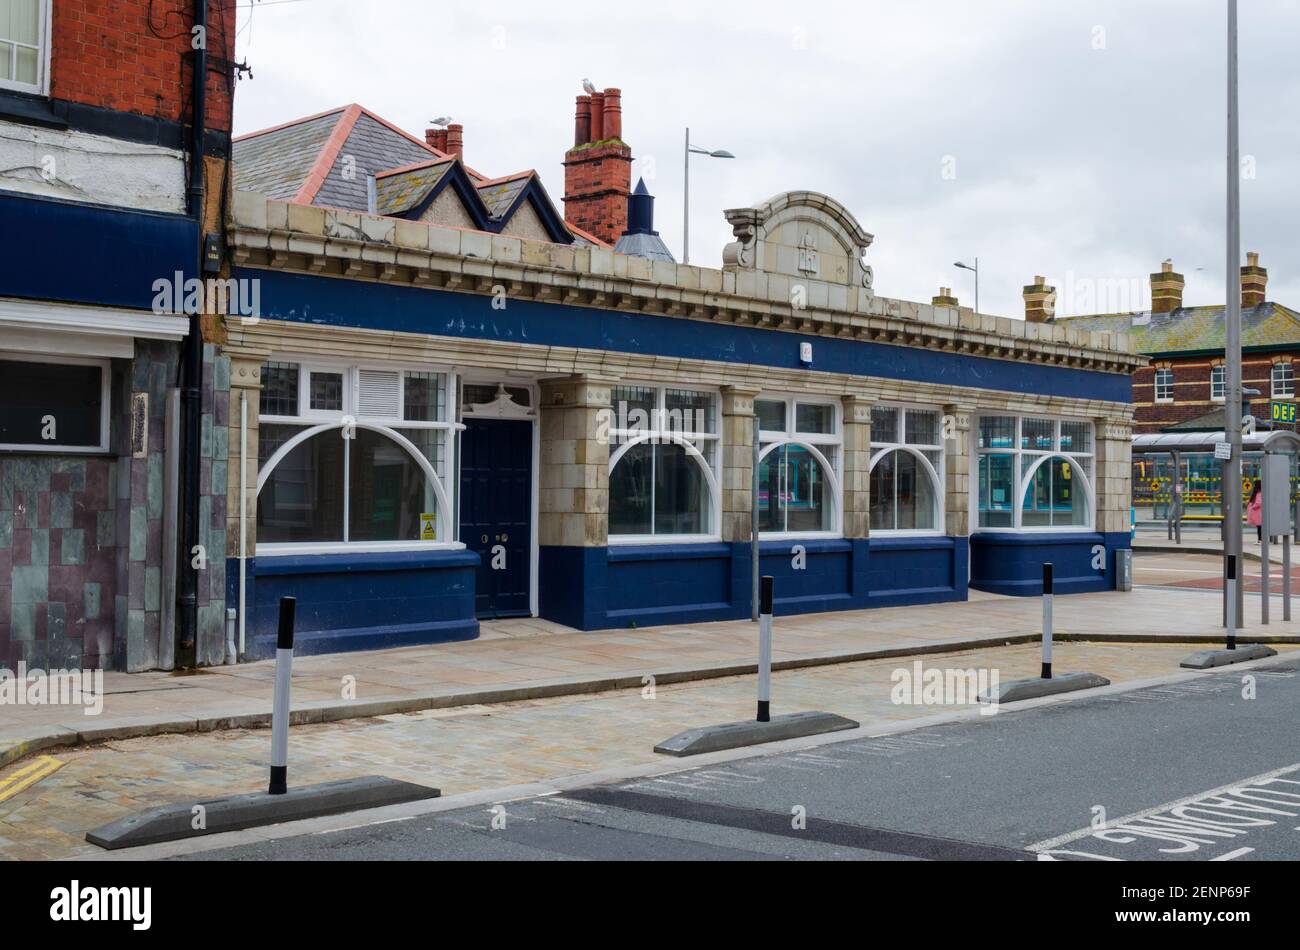 Rhyl, Denbighshire; UK: Feb 21, 2021: The former Costigans pub has been renovated and has been transformed into business units. Stock Photo